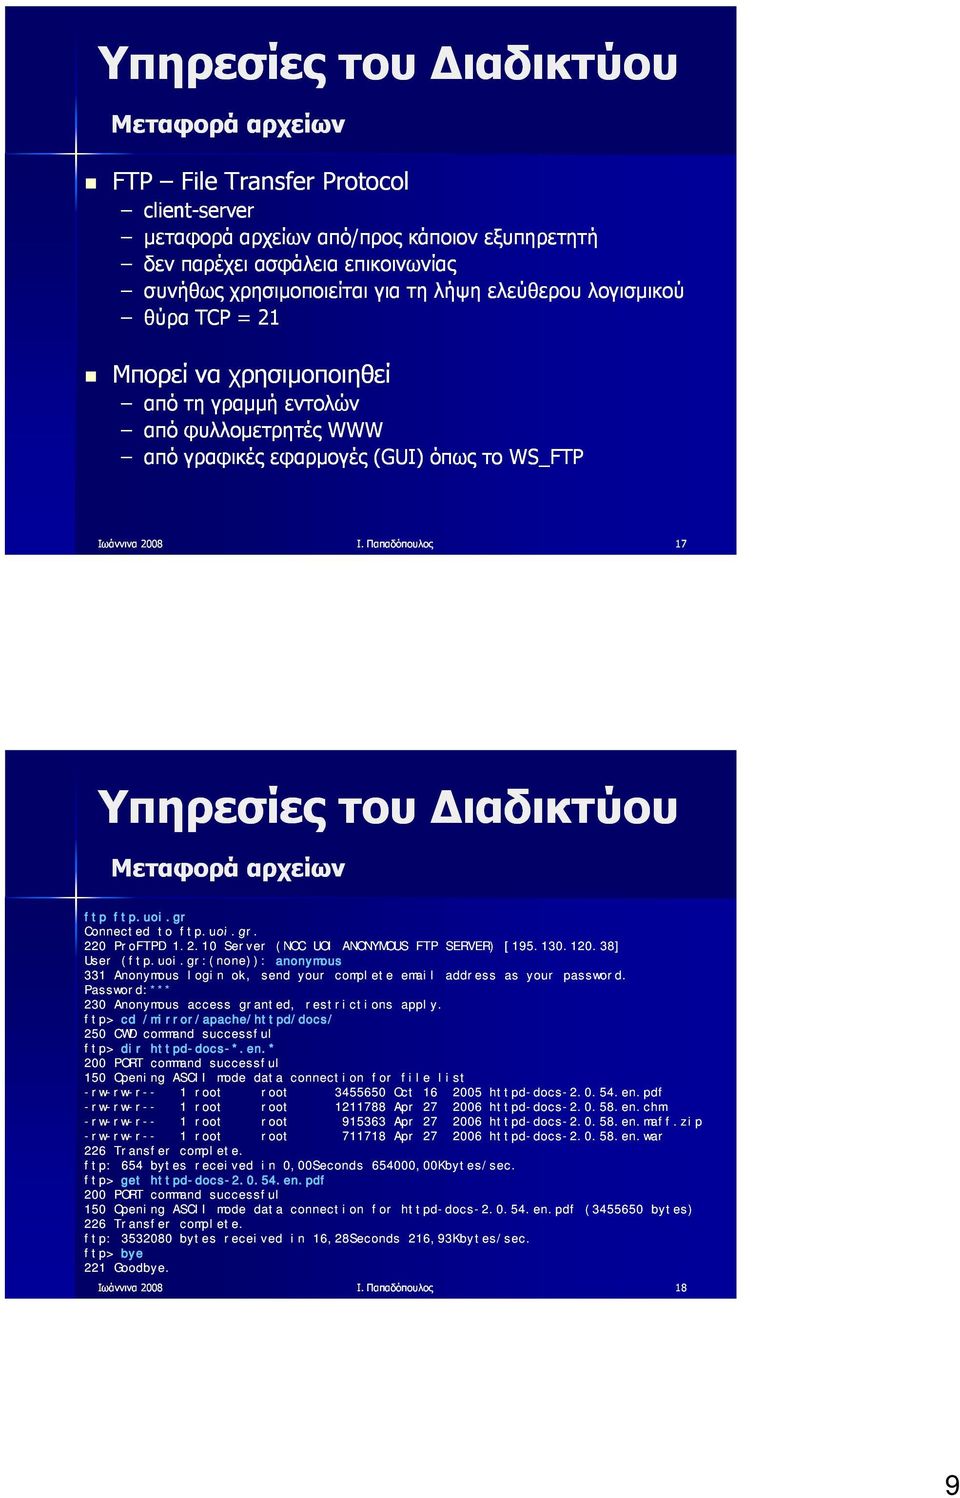 2.10 Server (NOC UOI ANONYMOUS FTP SERVER) [195.130.120.38] User (ftp.uoi.gr:(none)): anonymous 331 Anonymous login ok, send your complete email address as your password.